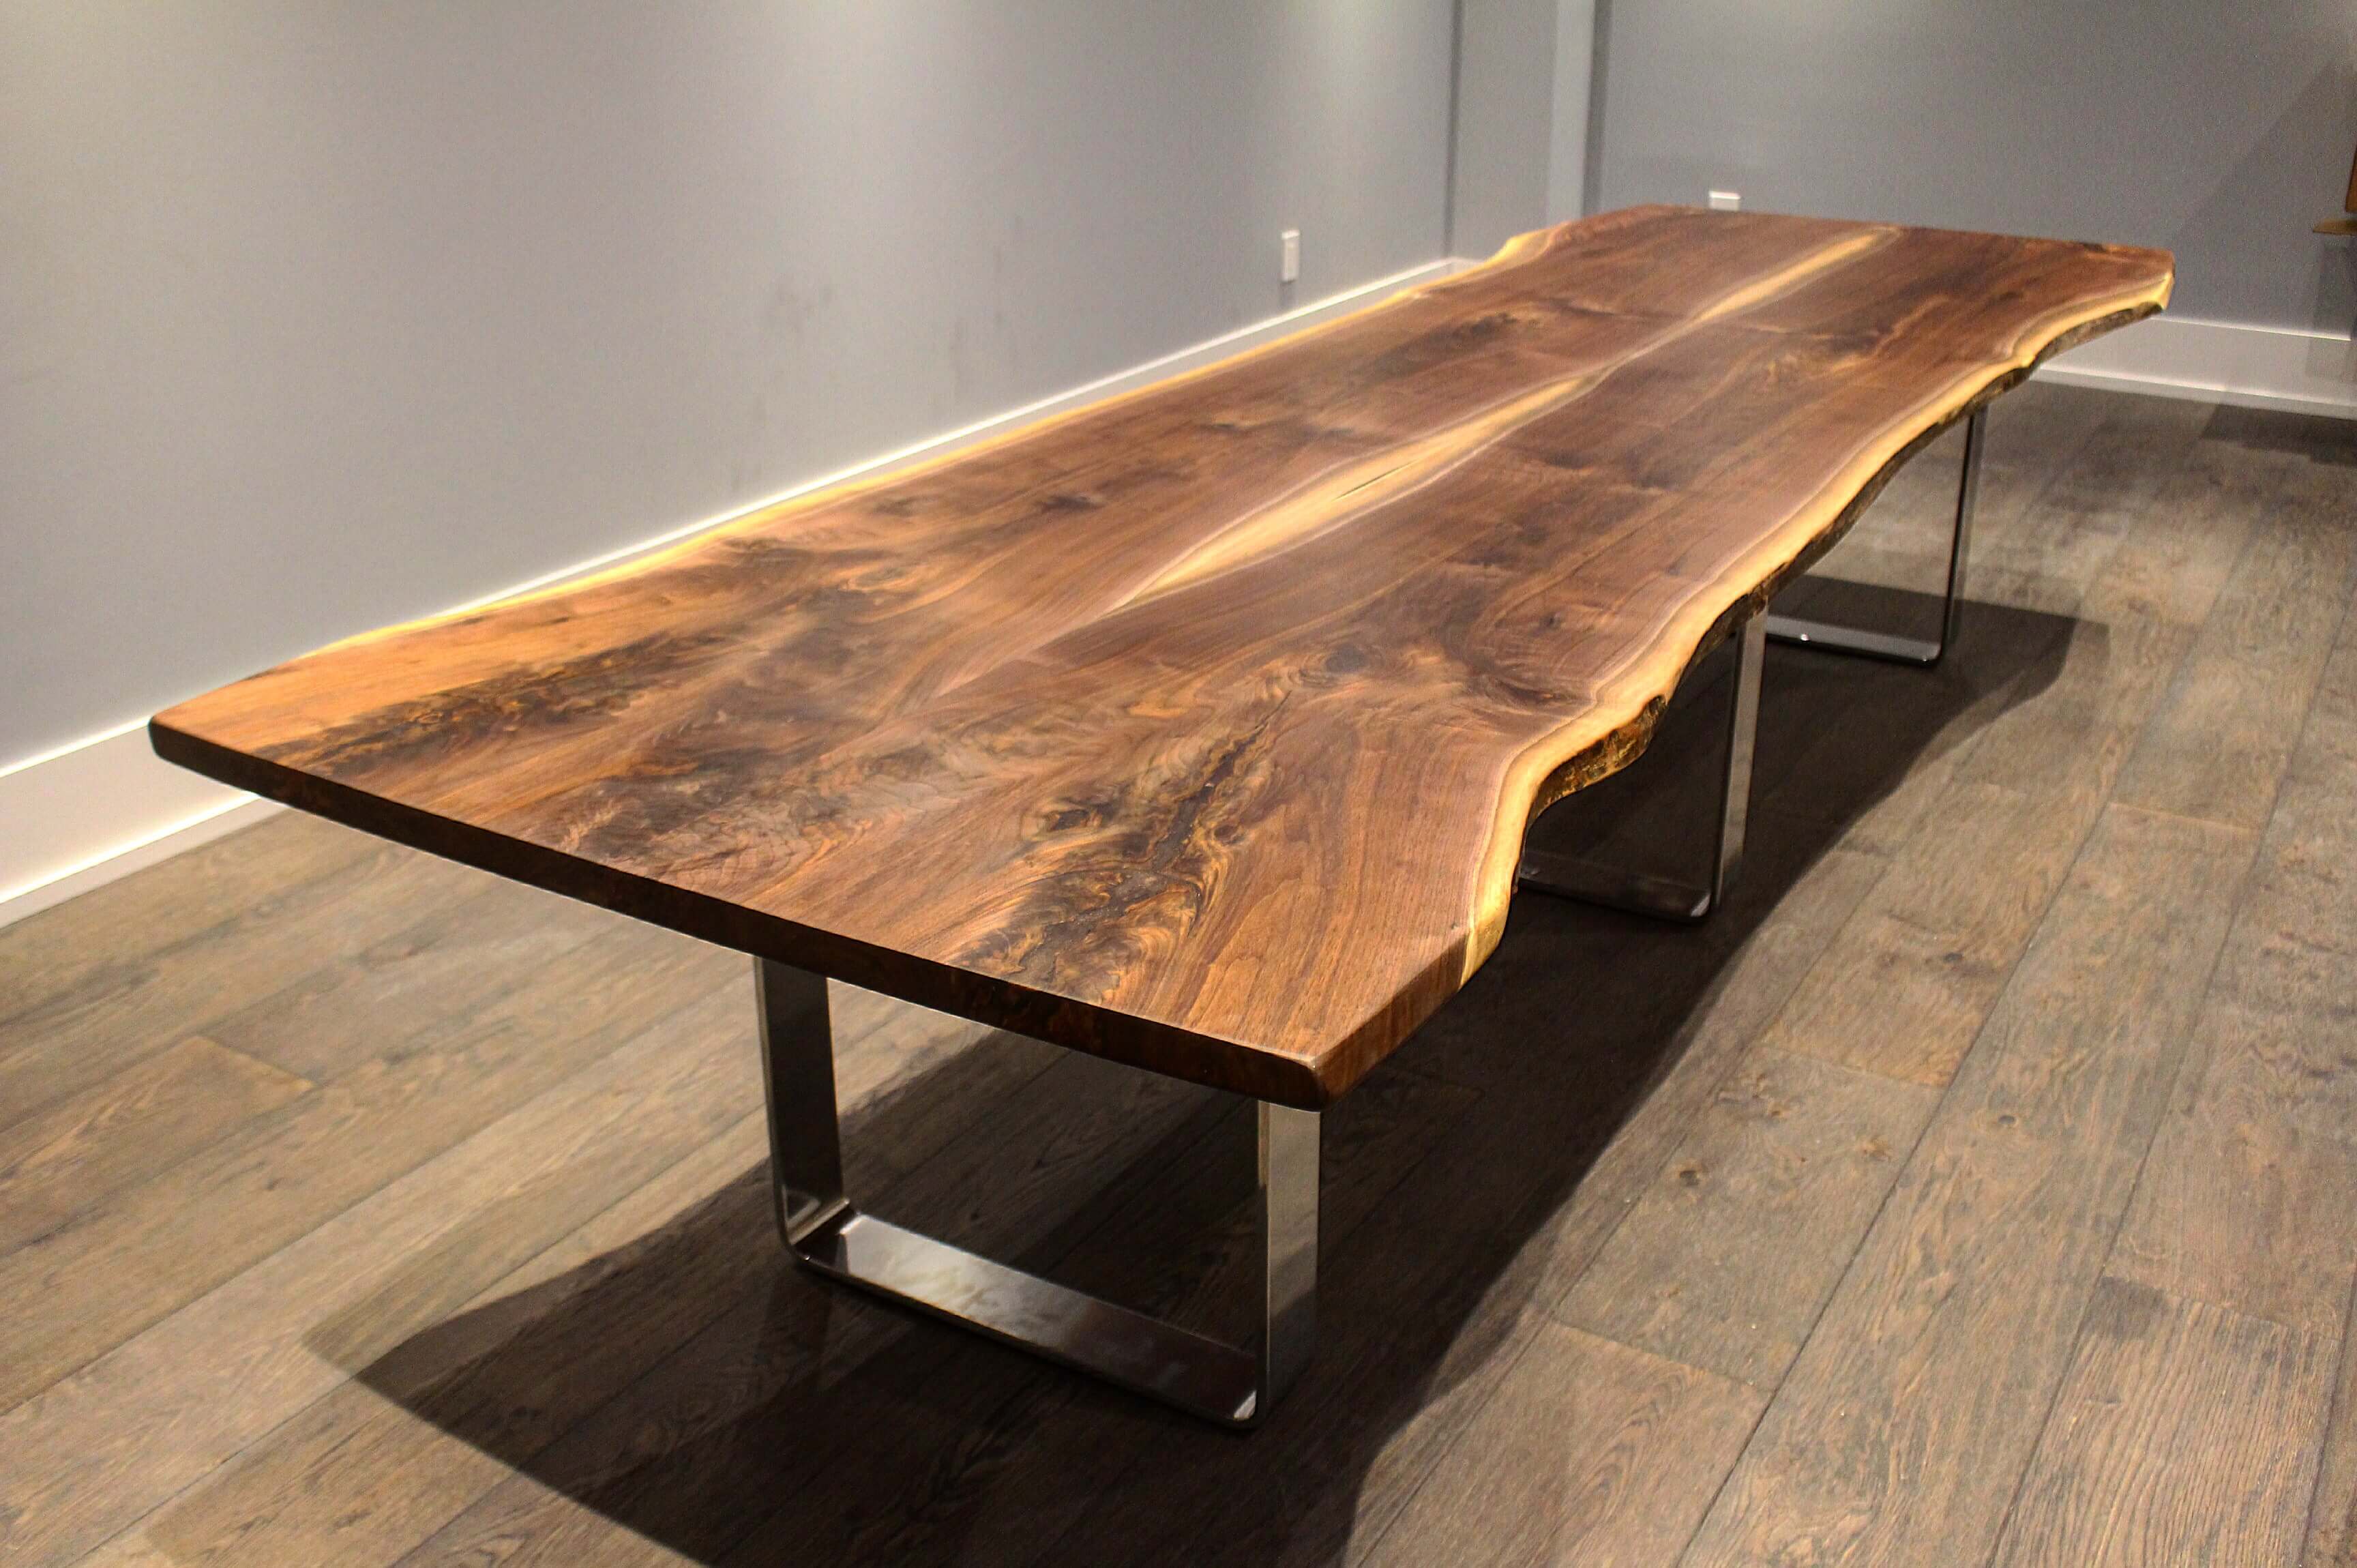 14' live edge black walnut table with chrome Rosseau base for New York City client